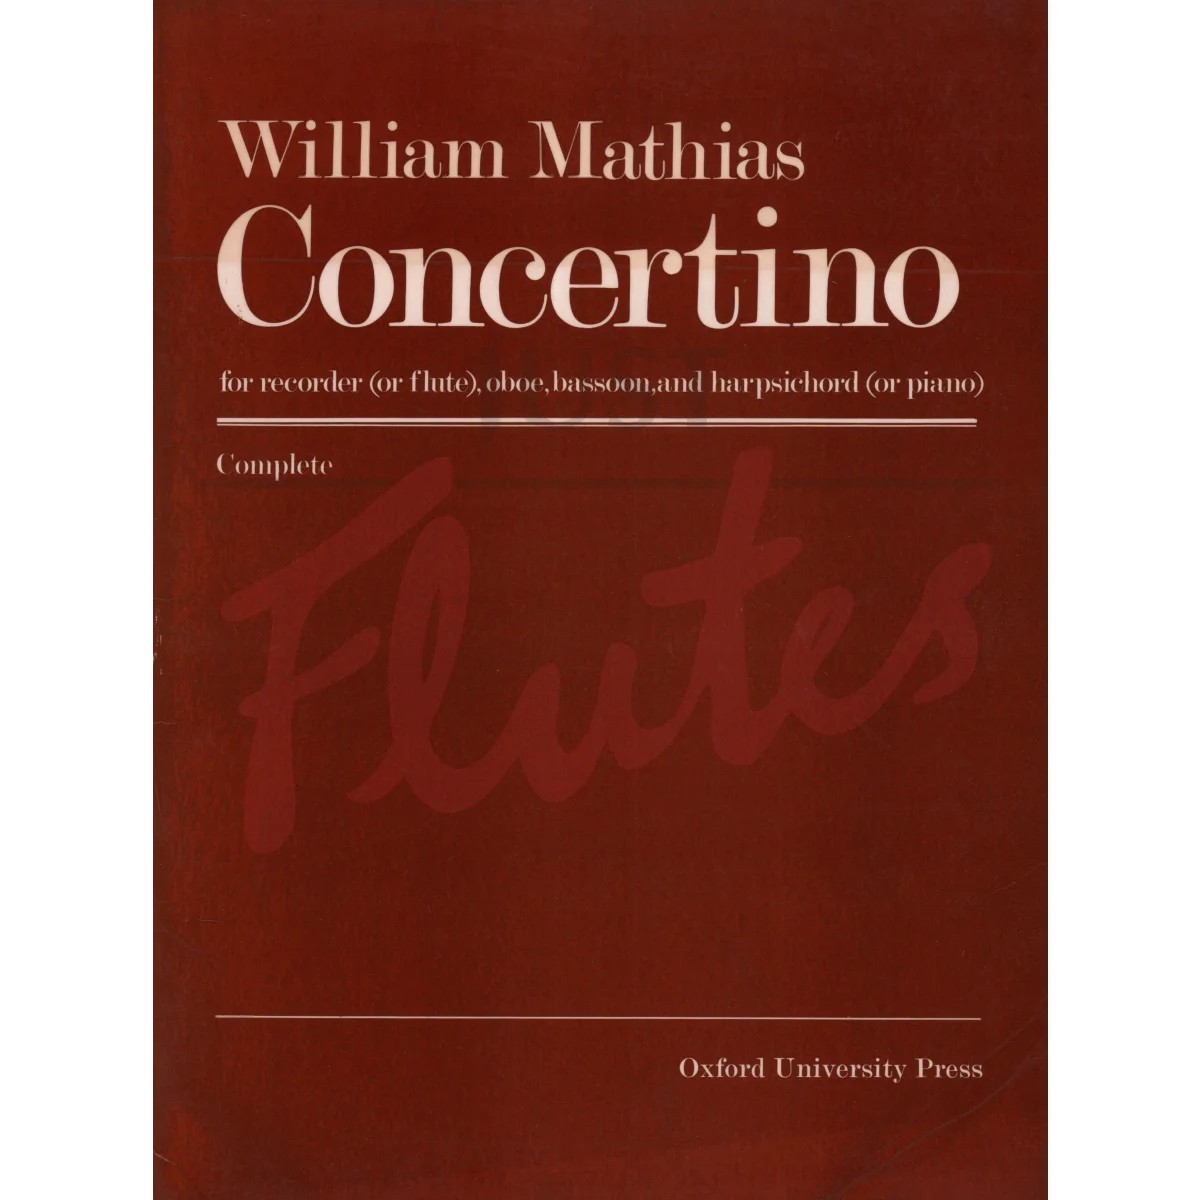 Concertino for Recorder/Flute, Oboe, Bassoon and Harpsichord/Piano